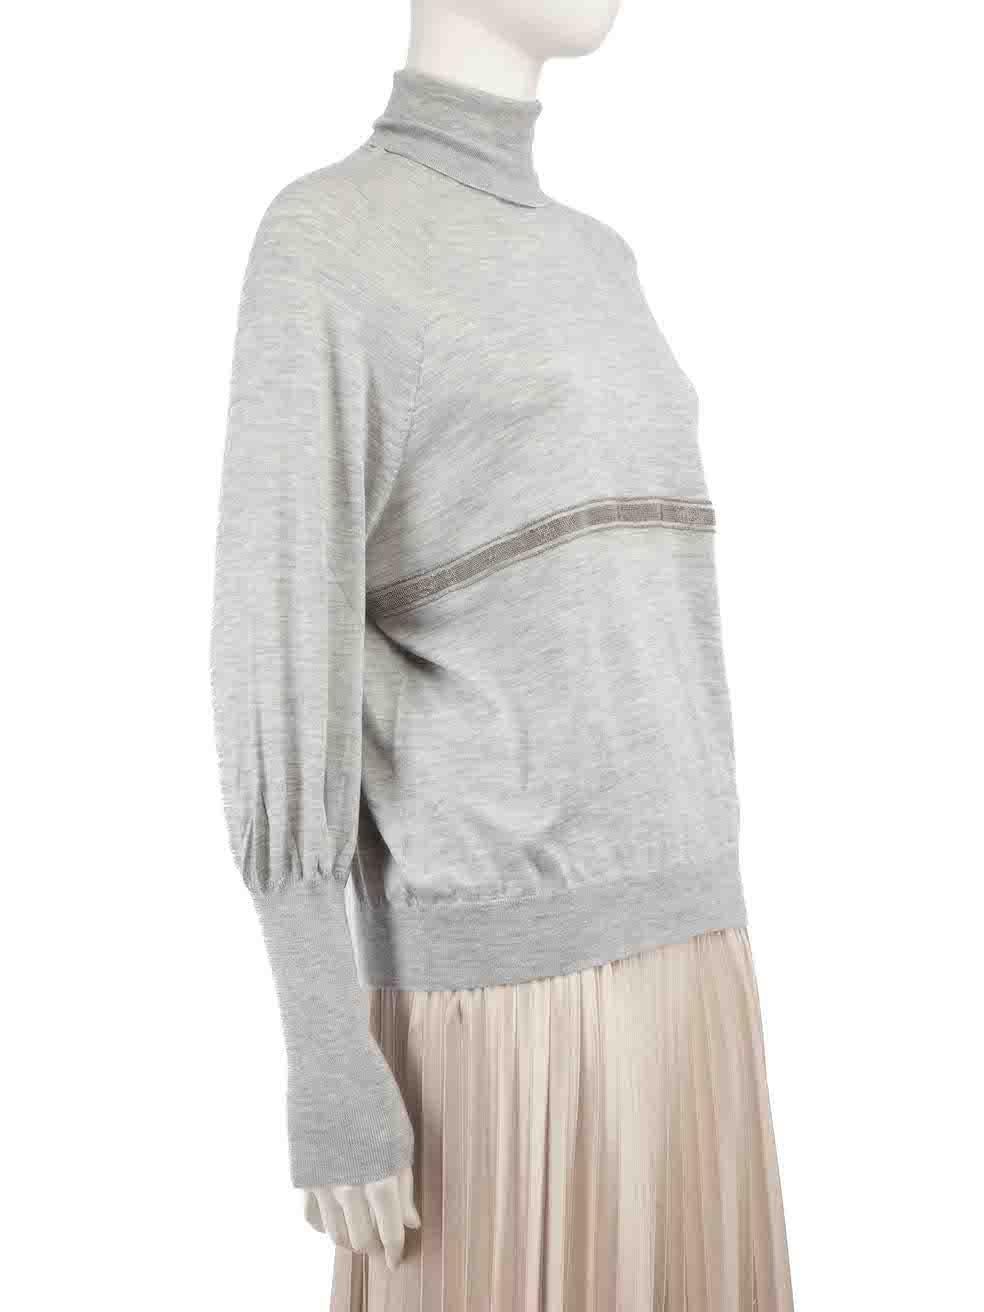 CONDITION is Very good. Hardly any visible wear to jumper is evident on this used Brunello Cucinelli designer resale item.
 
 
 
 Details
 
 
 Grey
 
 Cashmere
 
 Knit top
 
 Turtleneck
 
 Long sleeves
 
 Beaded stripe detail
 
 
 
 
 
 Made in